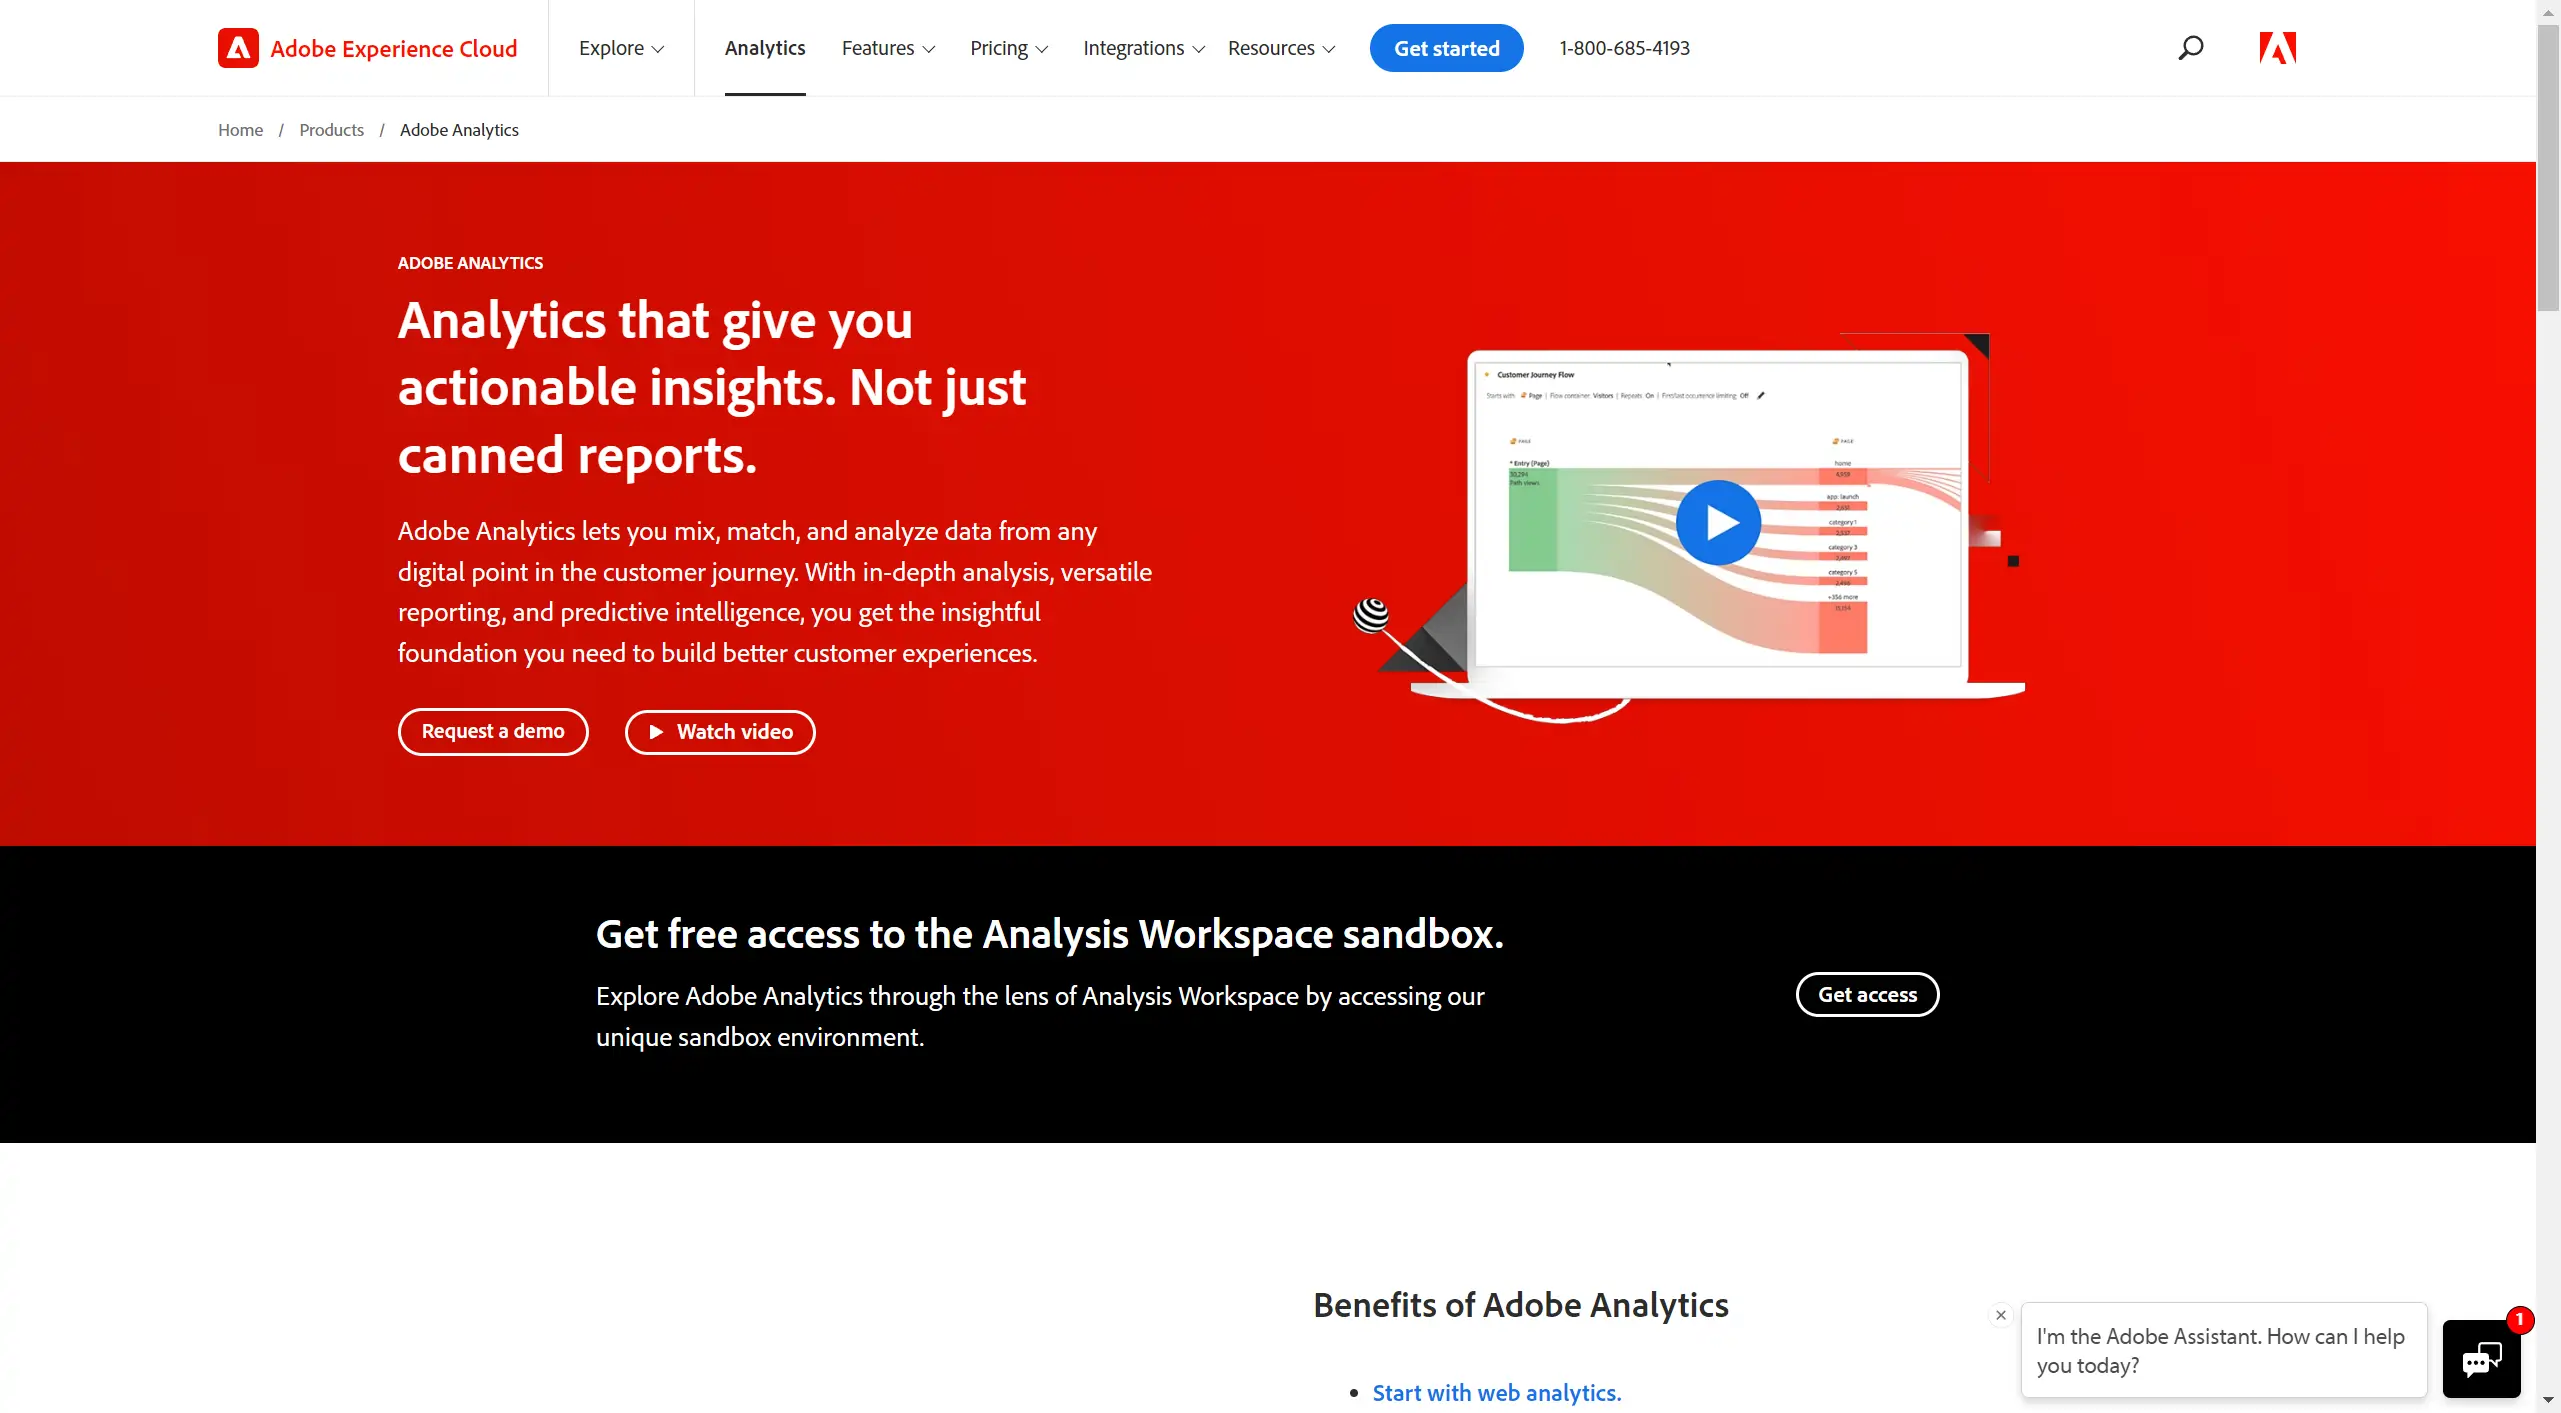 Adobe Analytics landing page talking about the actionable insights about your data